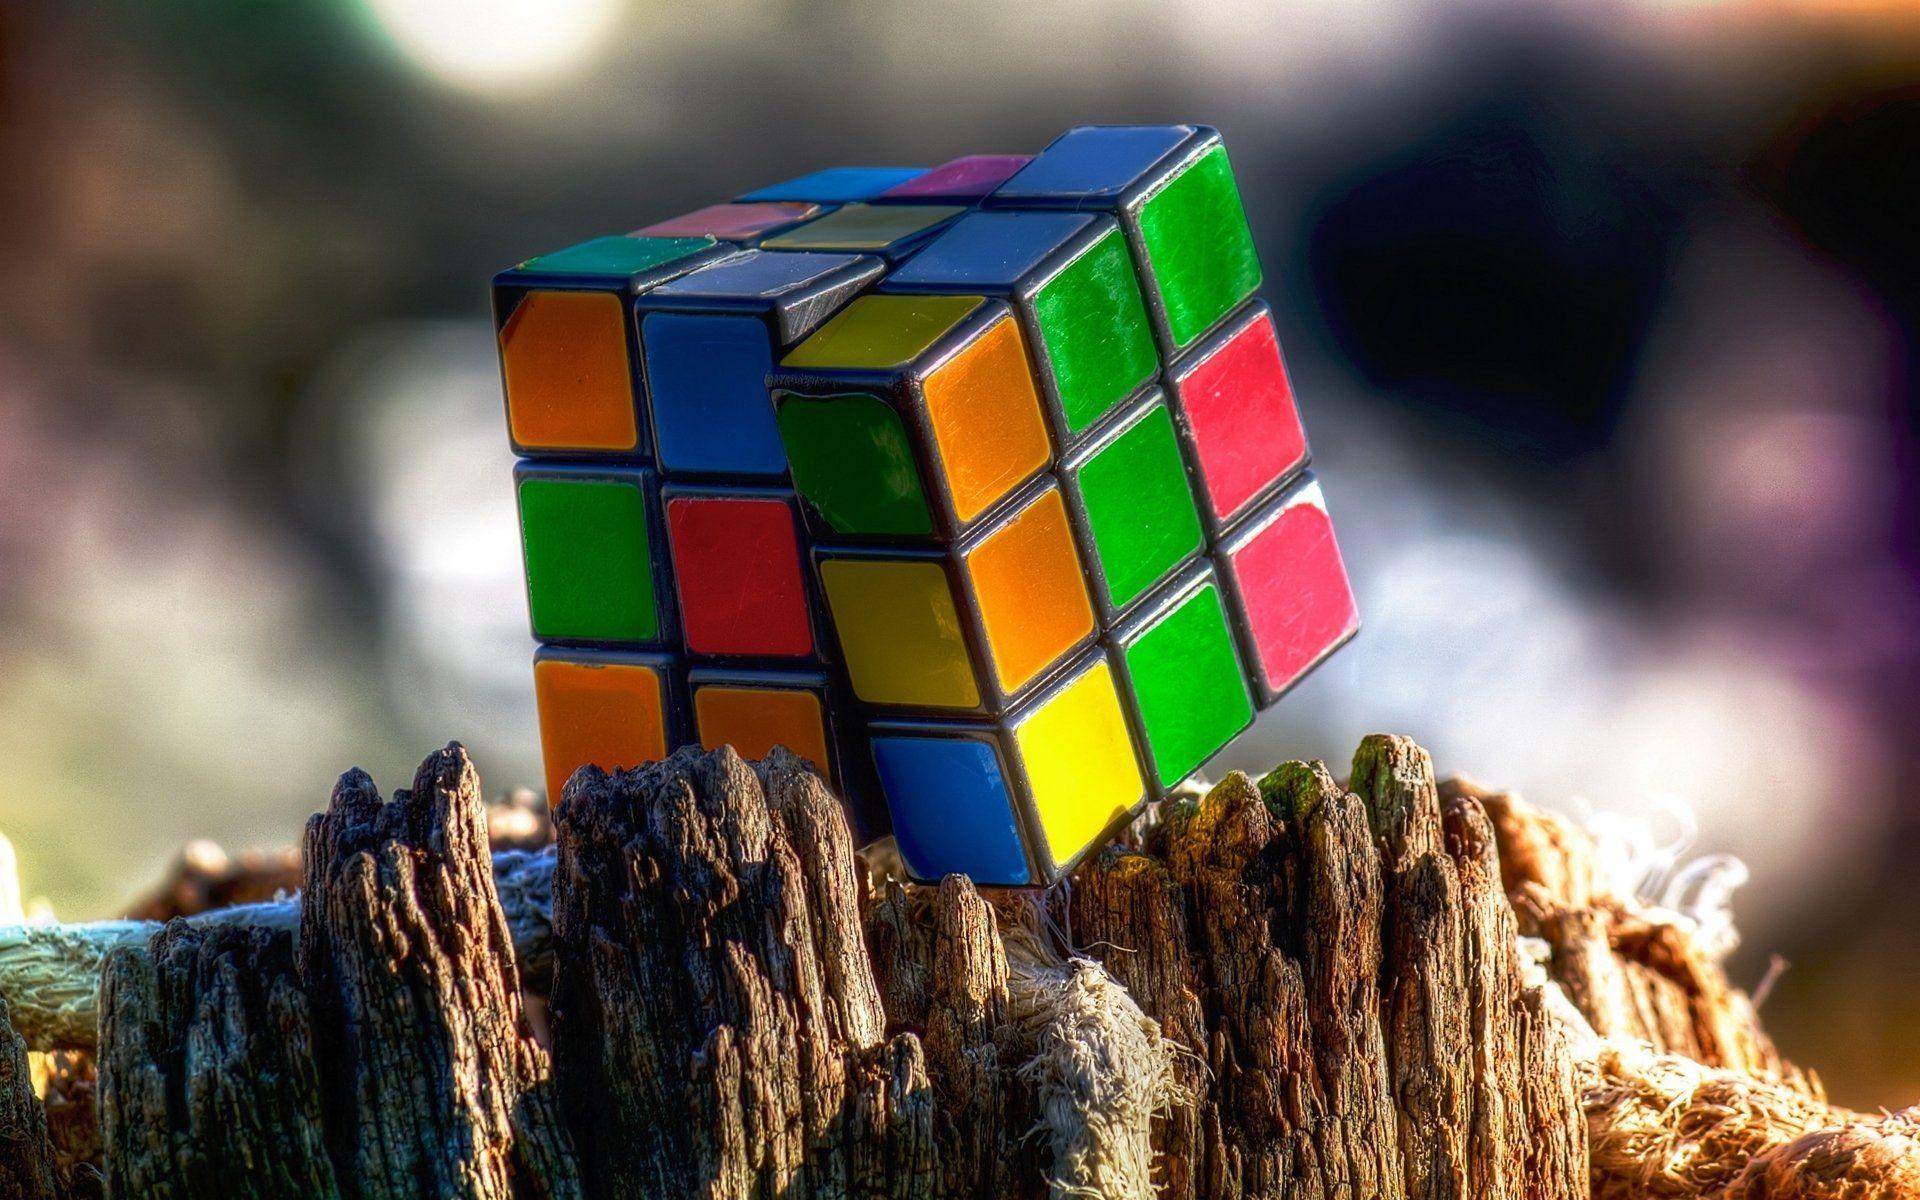 Rubik's Cube Full HD Wallpapers and Backgrounds Image.